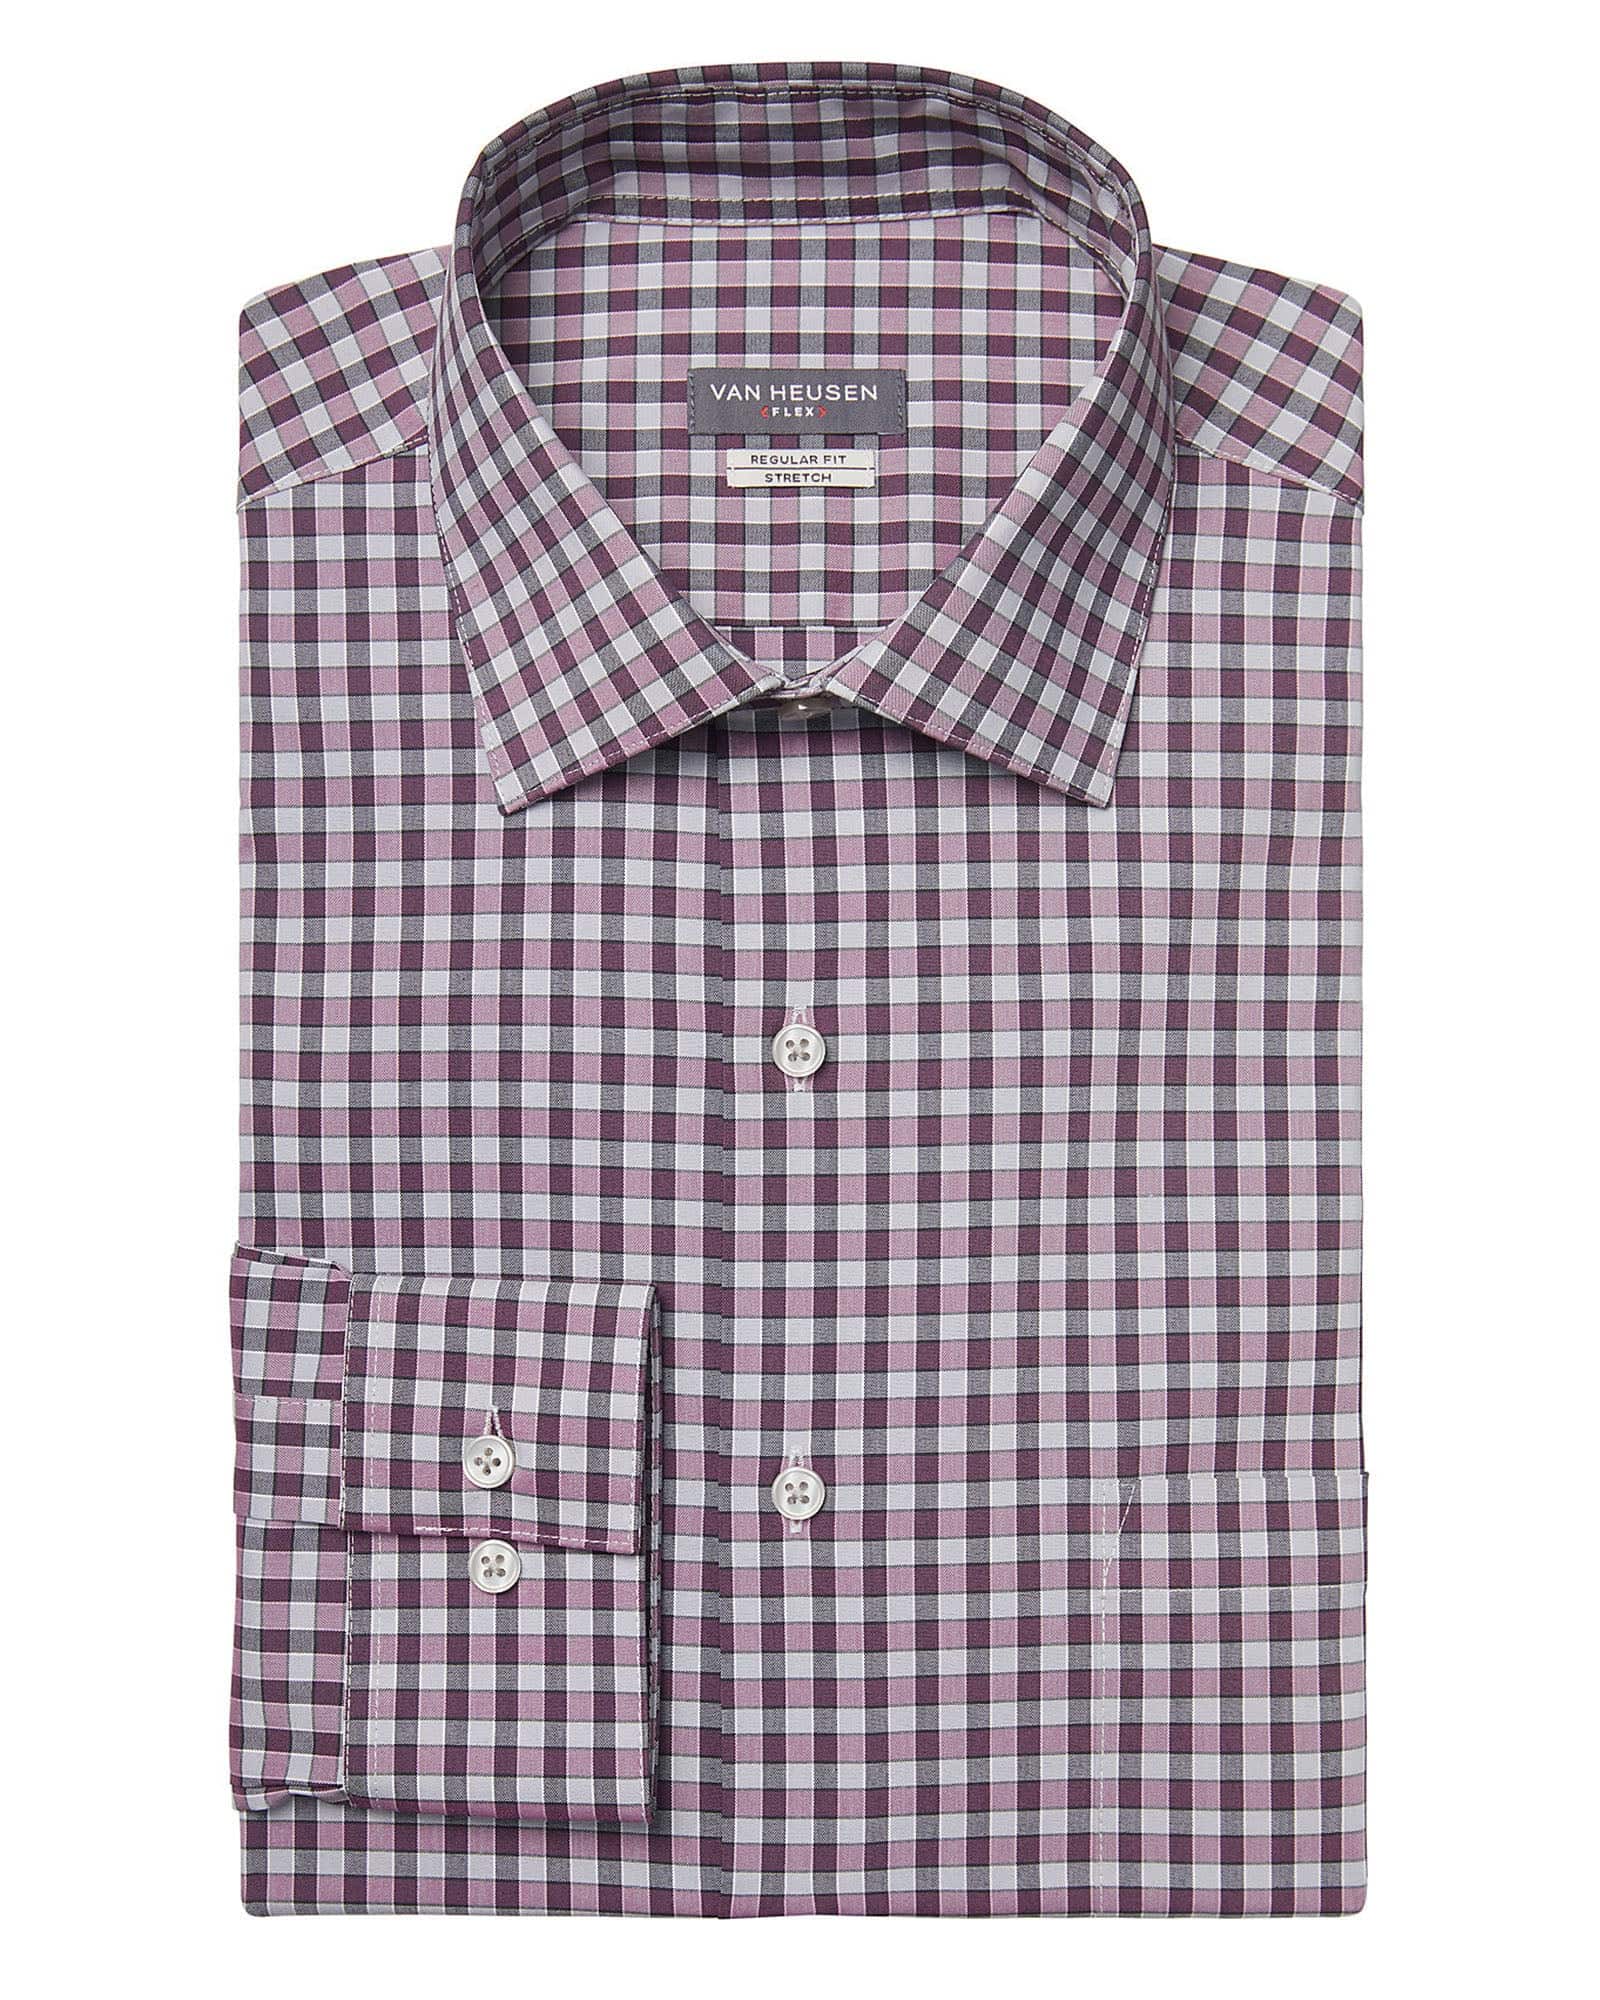 Van Heusen Big & Tall Fit FLEX Stretch Wrinkle Free Check In Lilac - Rainwater's Men's Clothing and Tuxedo Rental